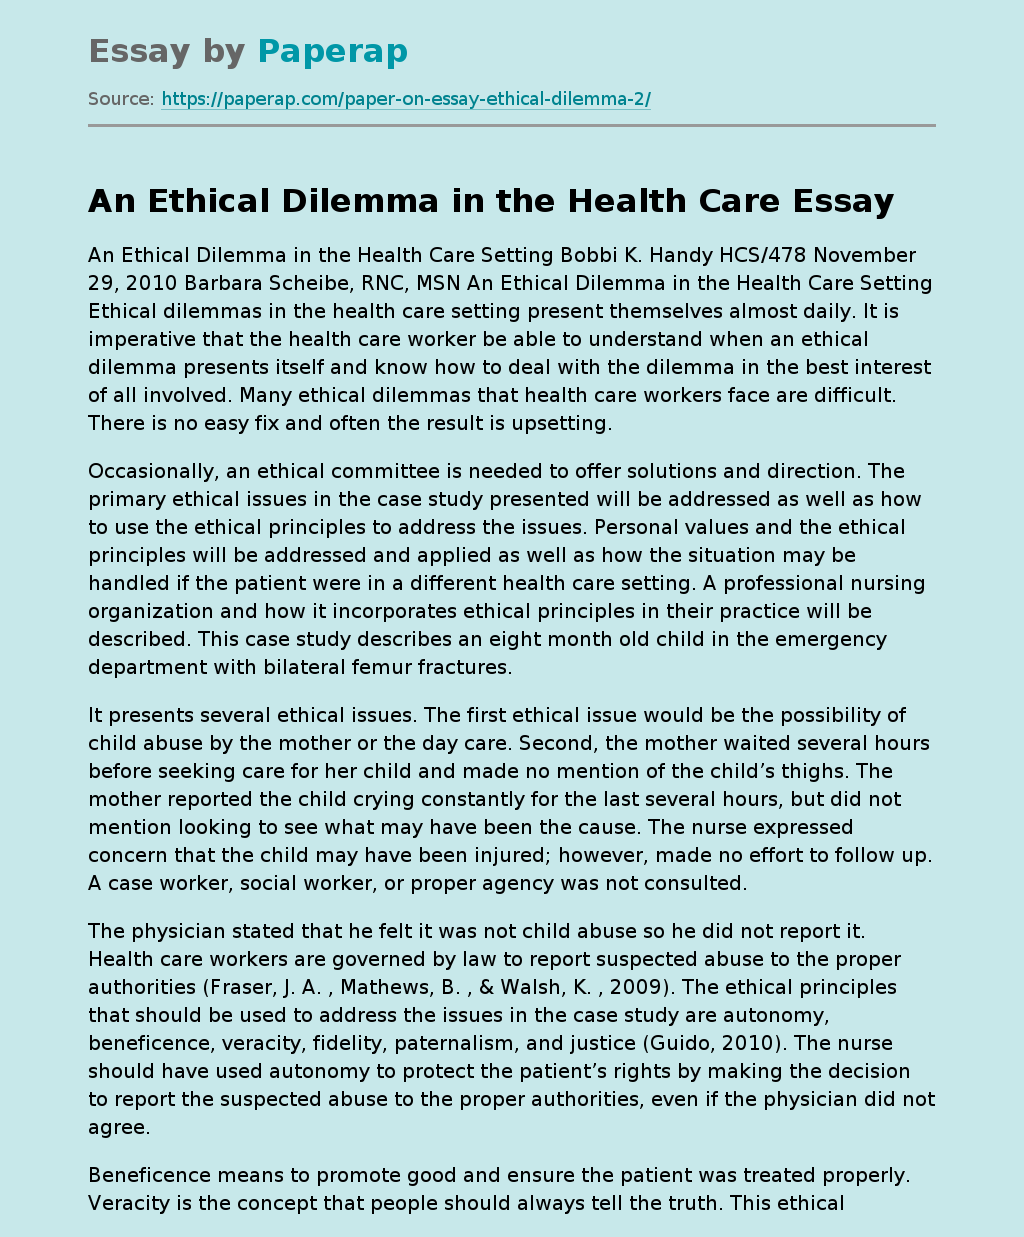 An Ethical Dilemma in the Health Care